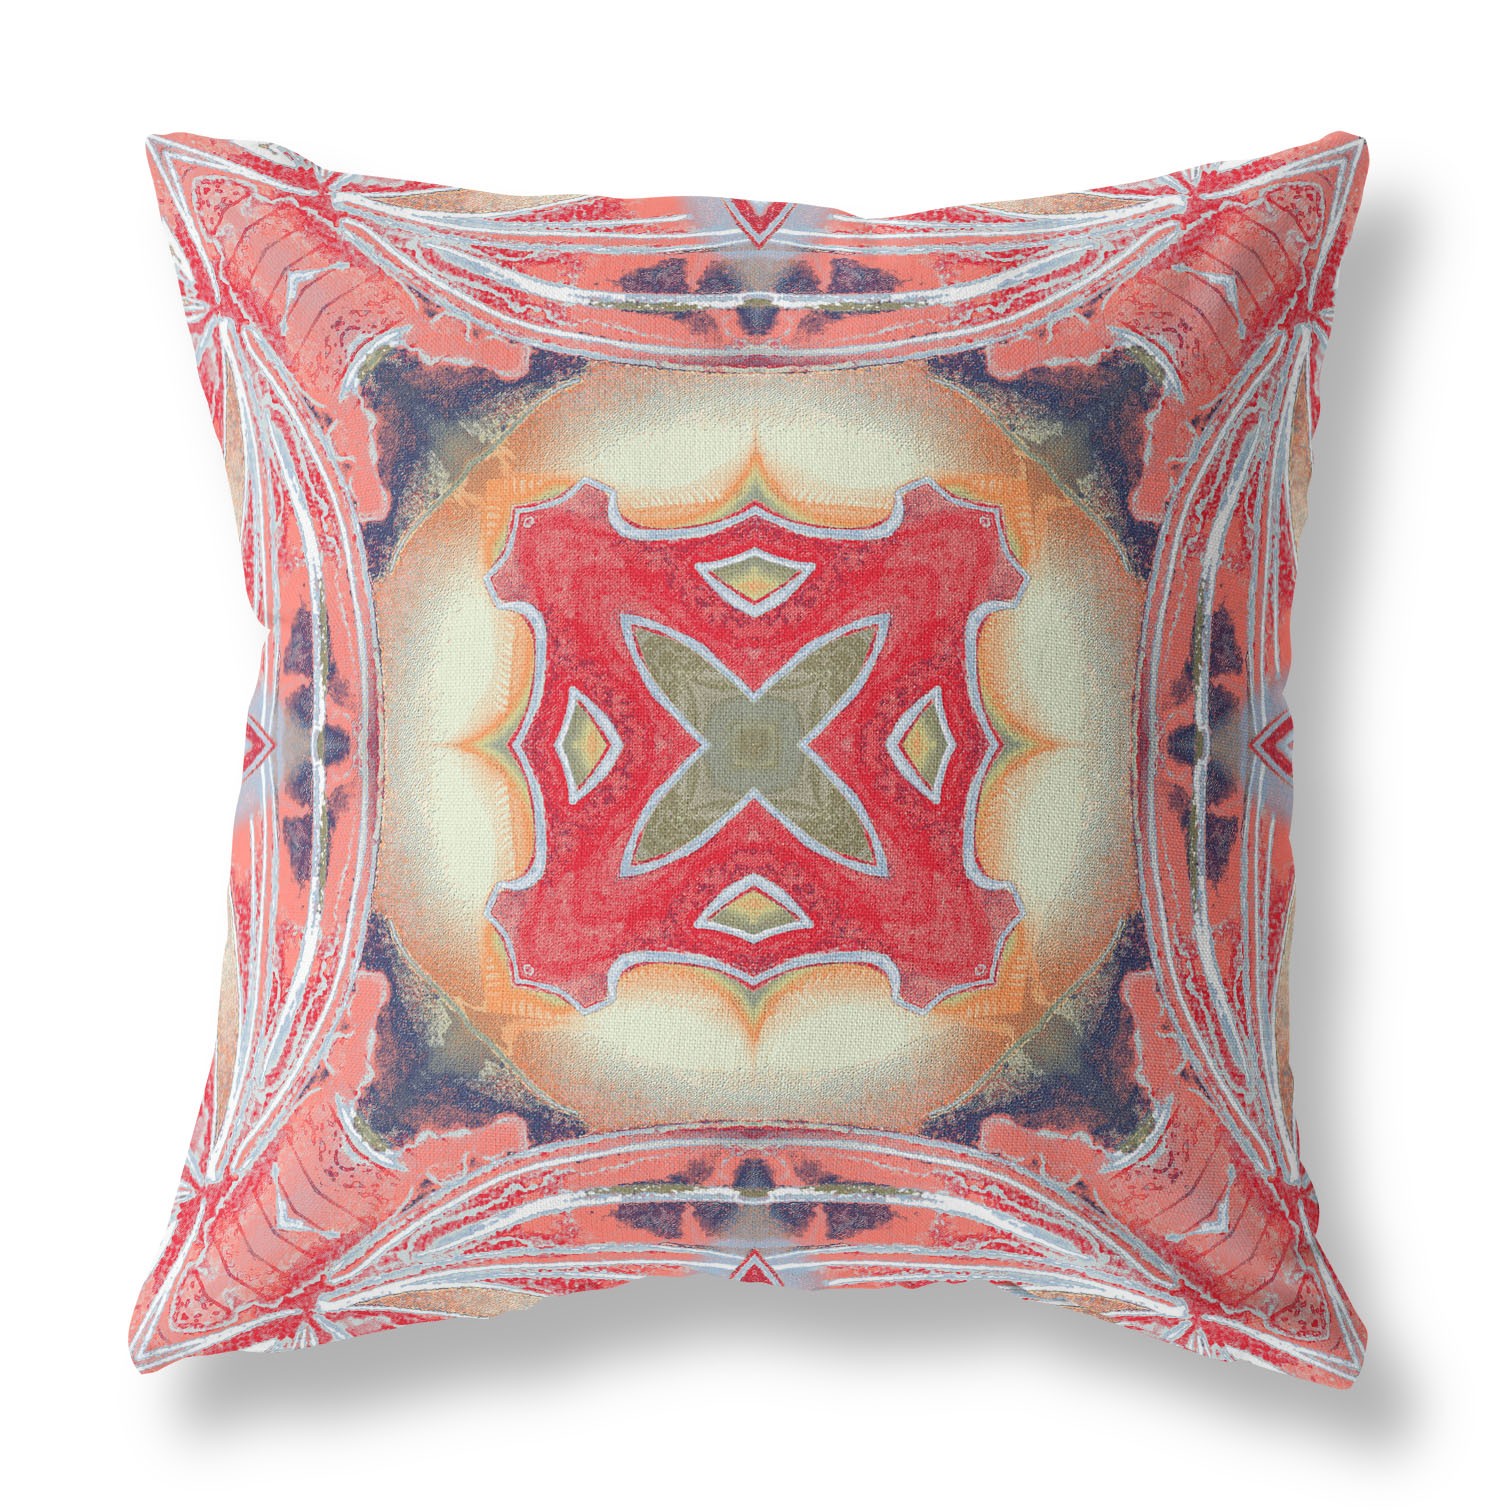 20"x20" Pink Peach Red Zippered Broadcloth Geometric Throw Pillow-417634-1